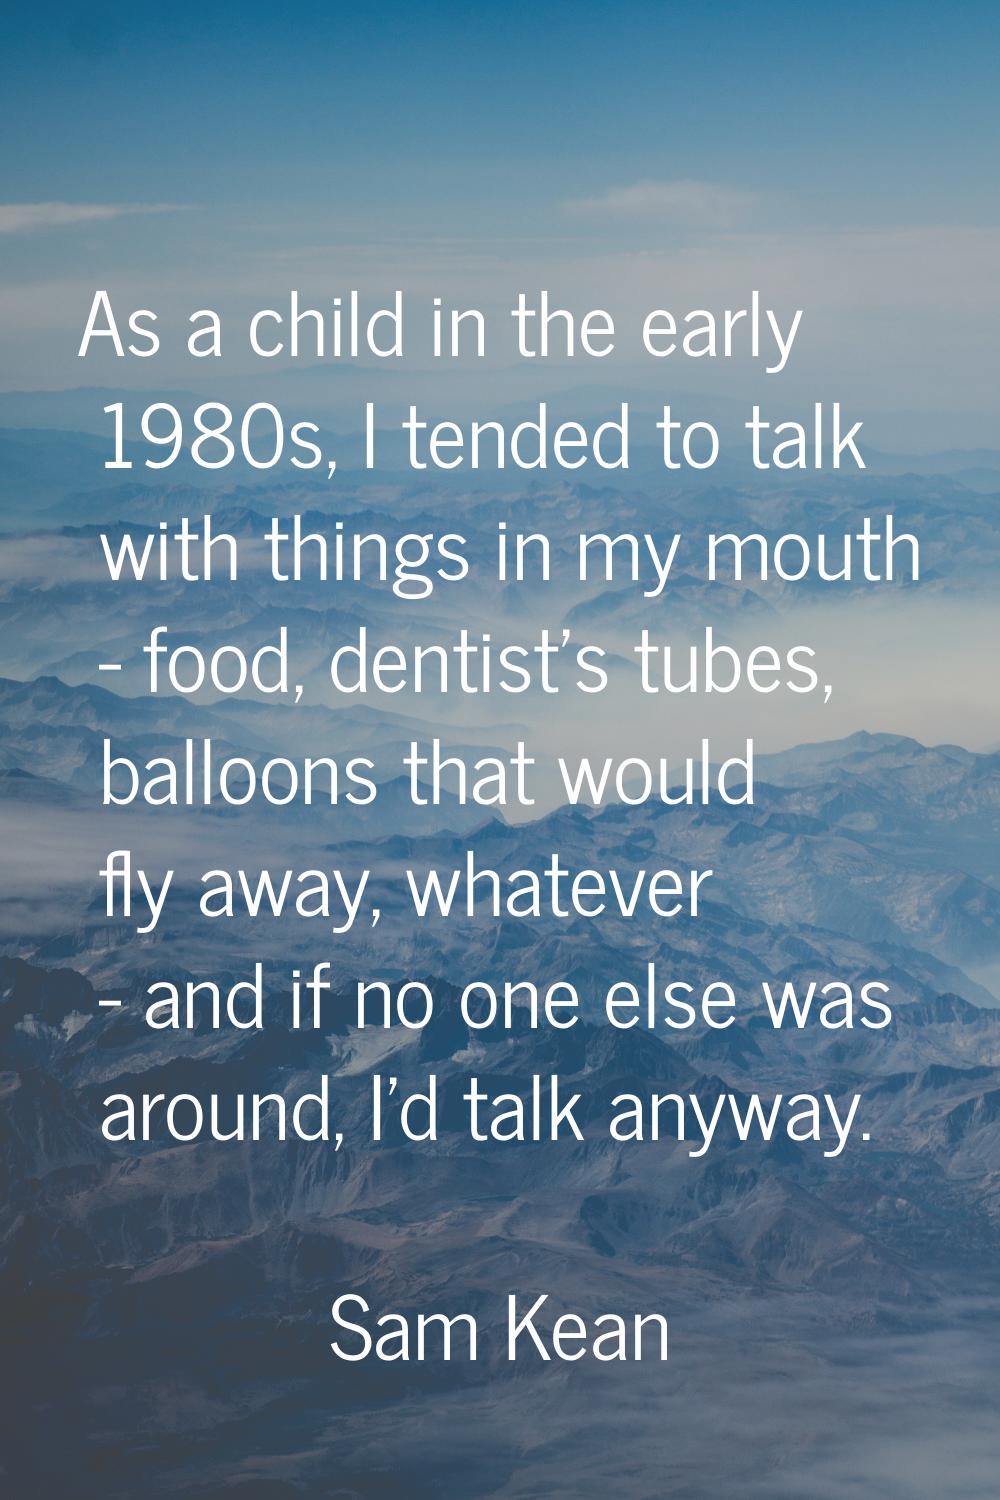 As a child in the early 1980s, I tended to talk with things in my mouth - food, dentist's tubes, ba